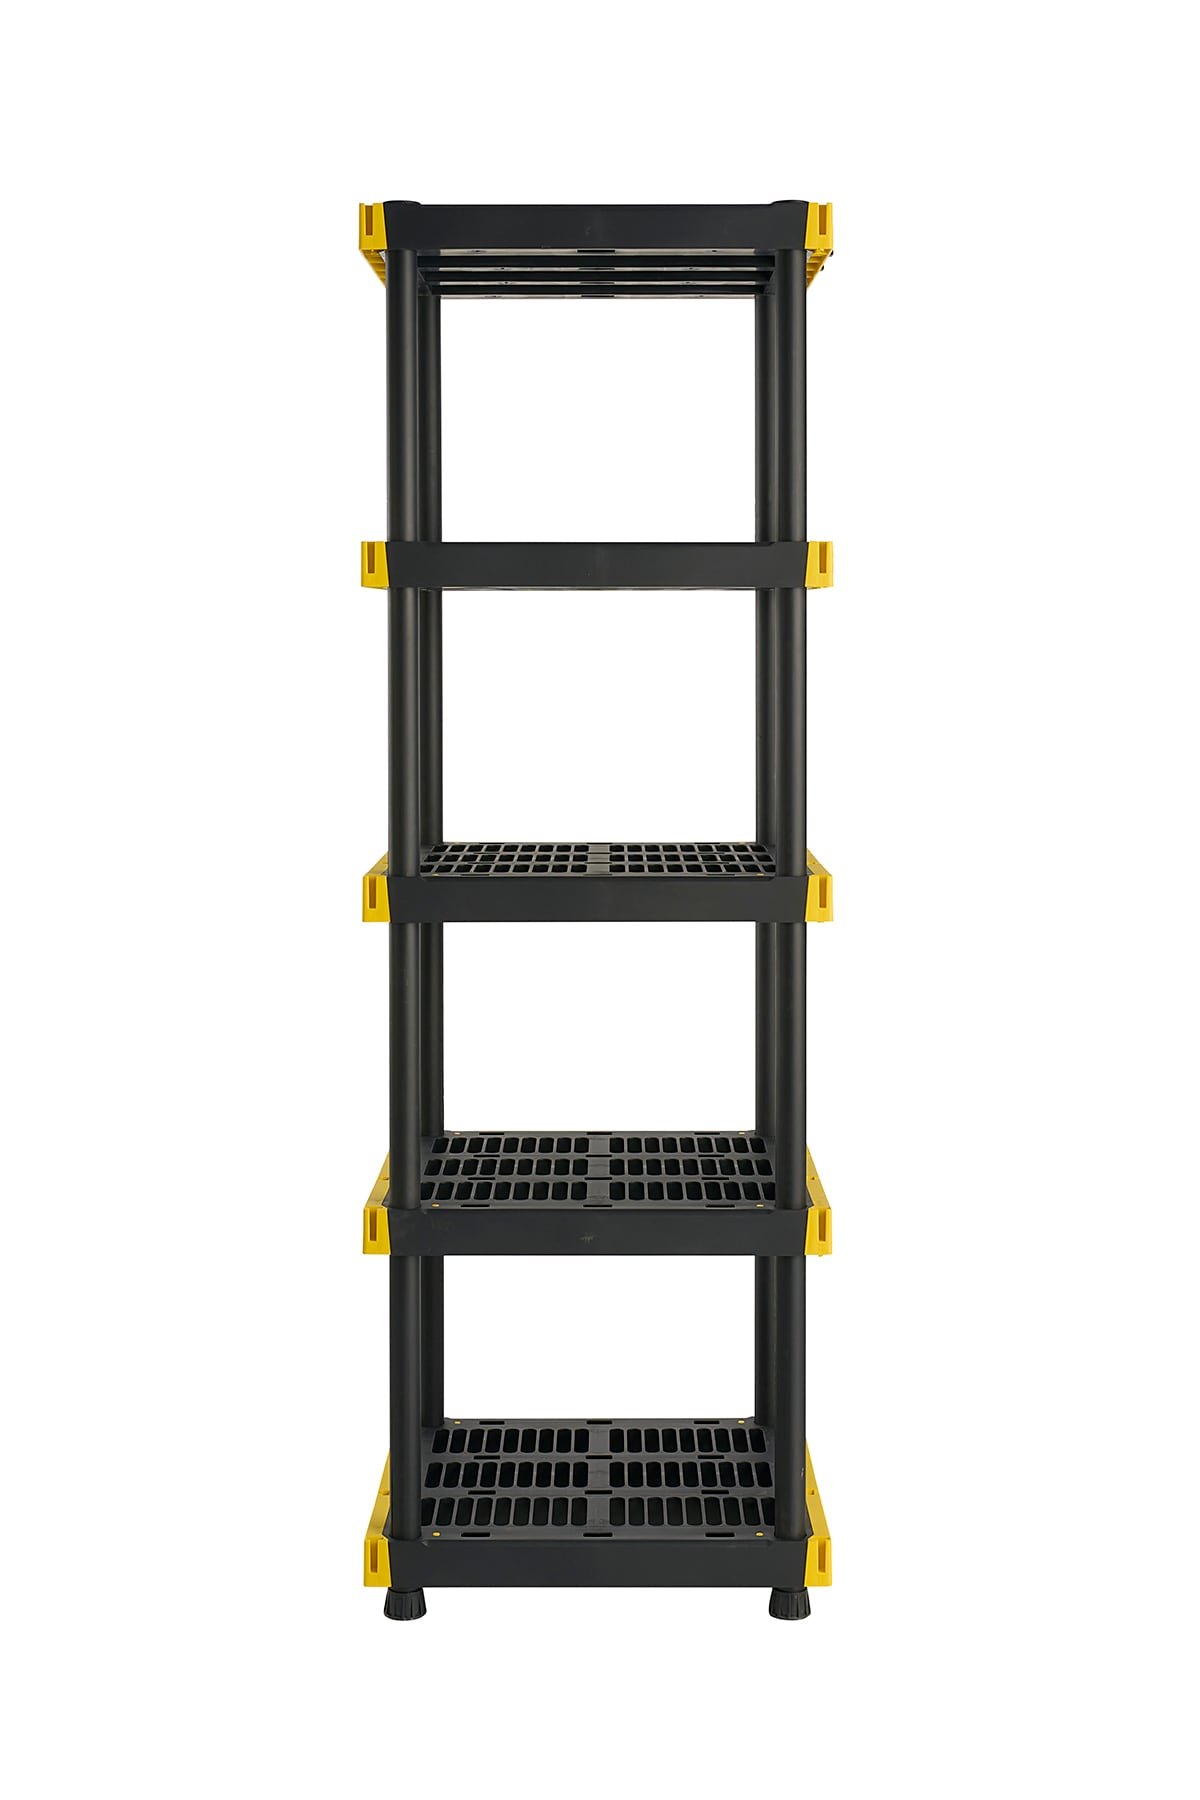 Shelving Inc. 5 Hook Attachment for Wire Shelving